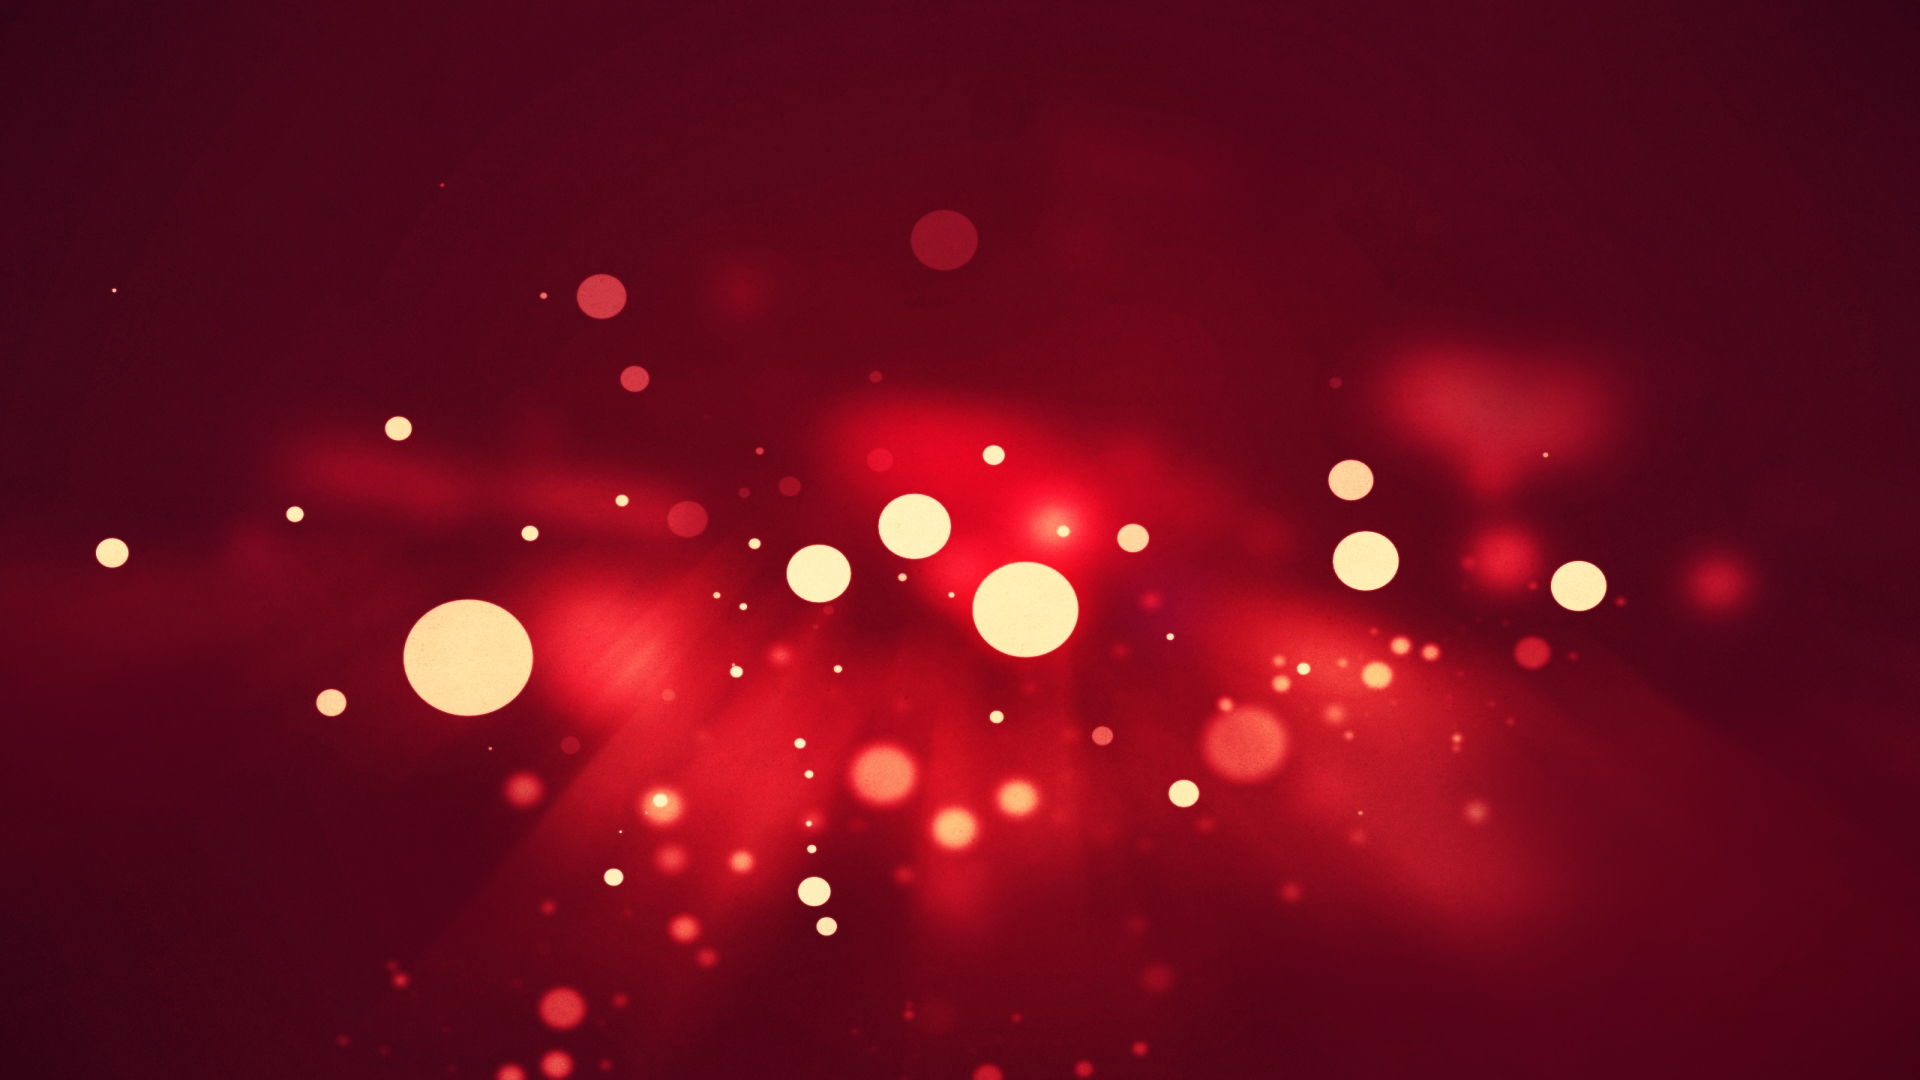 White Dots Red Background Hd Wallpaper - Red And White Background , HD Wallpaper & Backgrounds